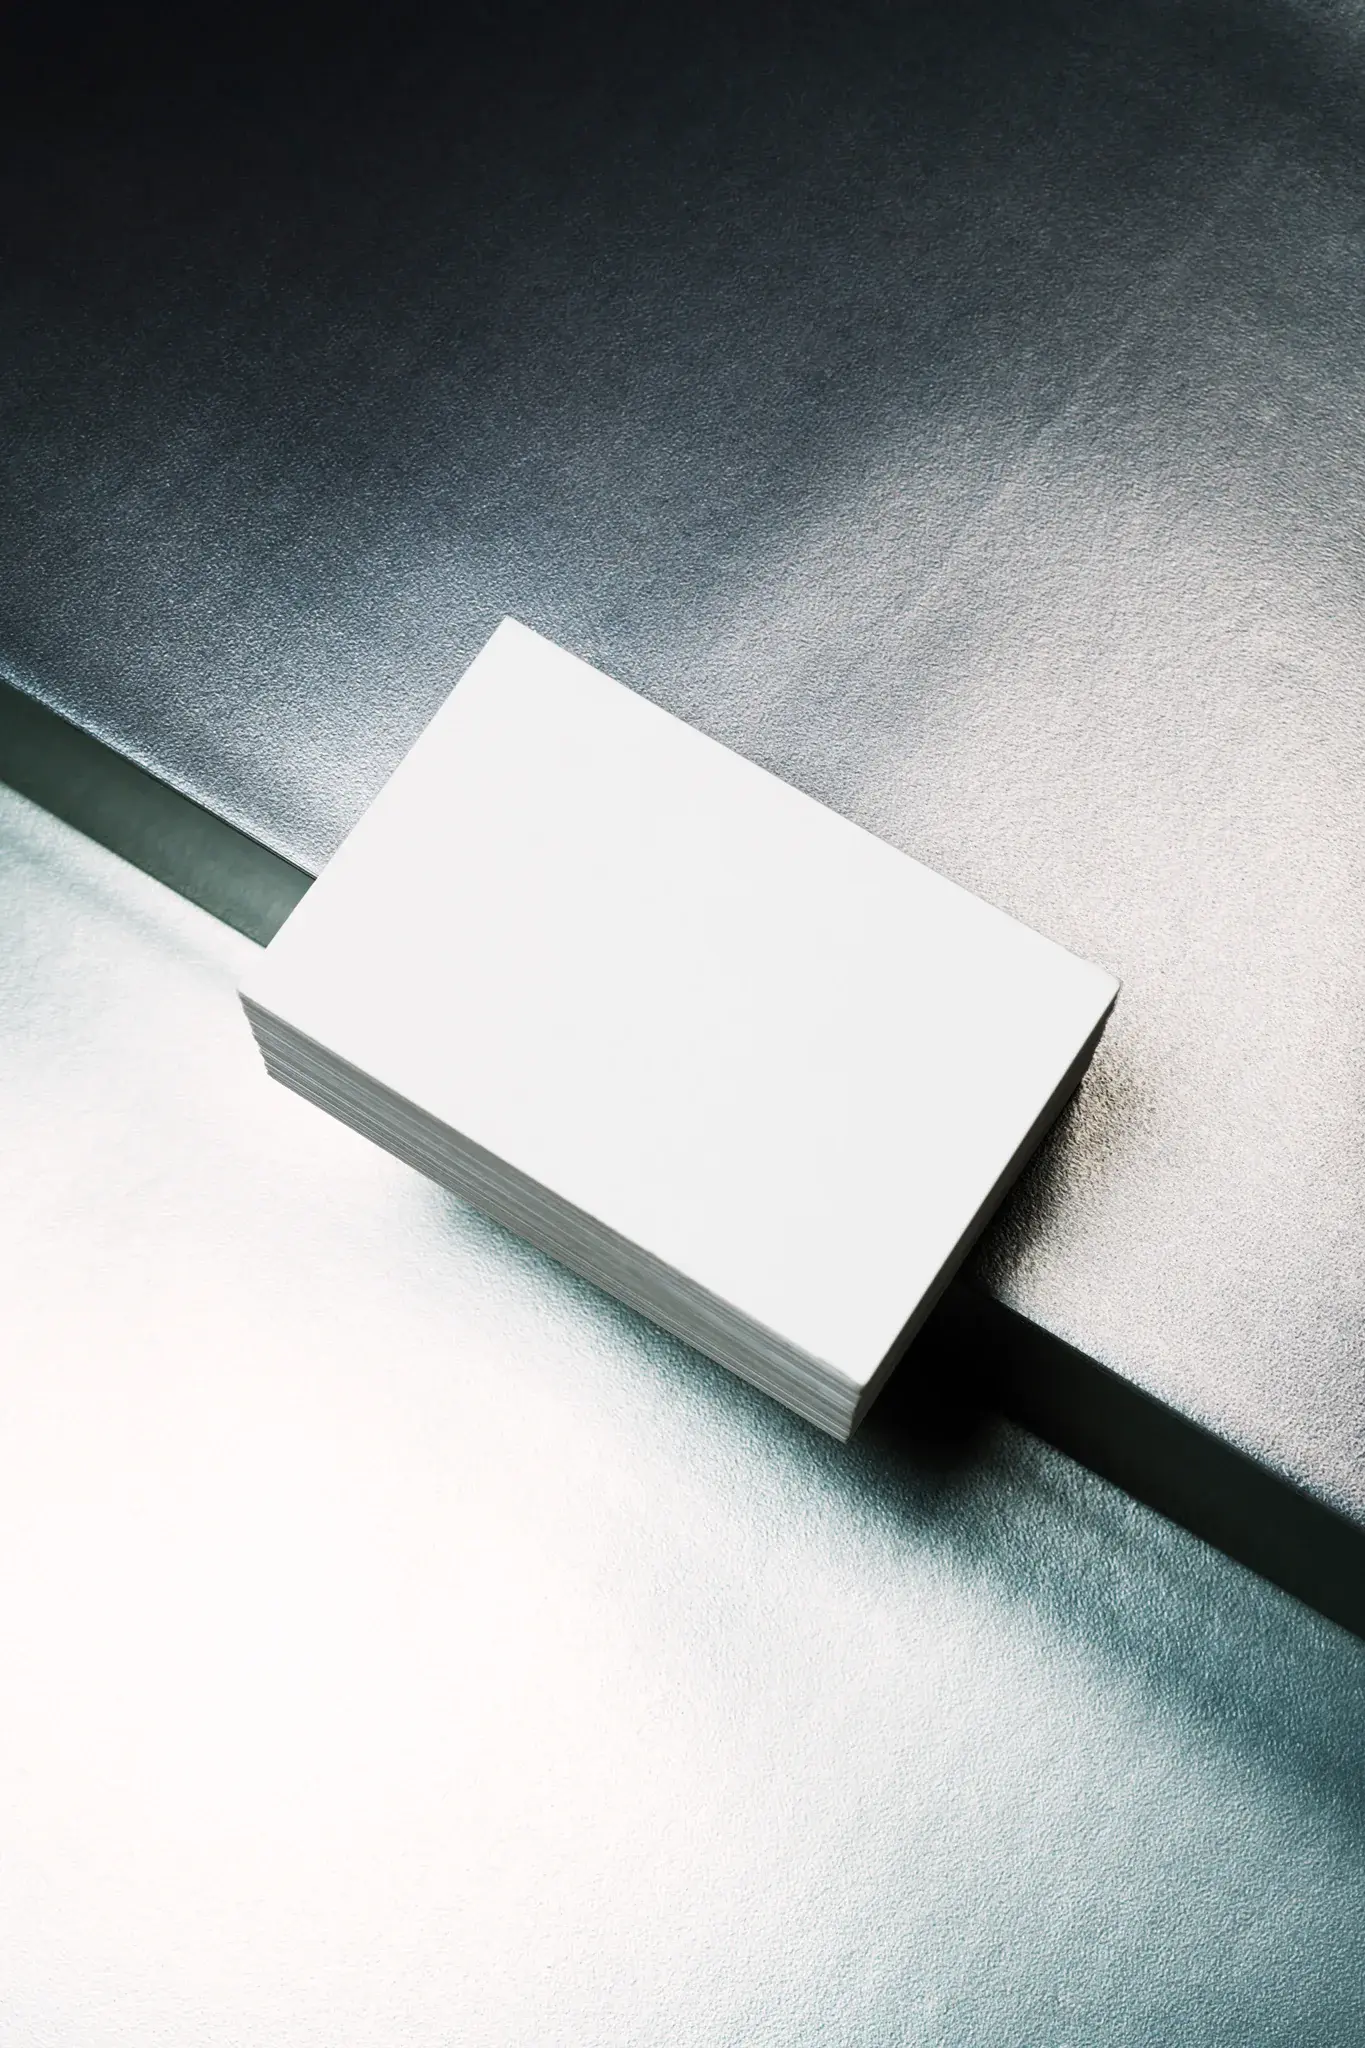 Business card mockup. Block of business cards placed on a metal surface. Branding mockup.